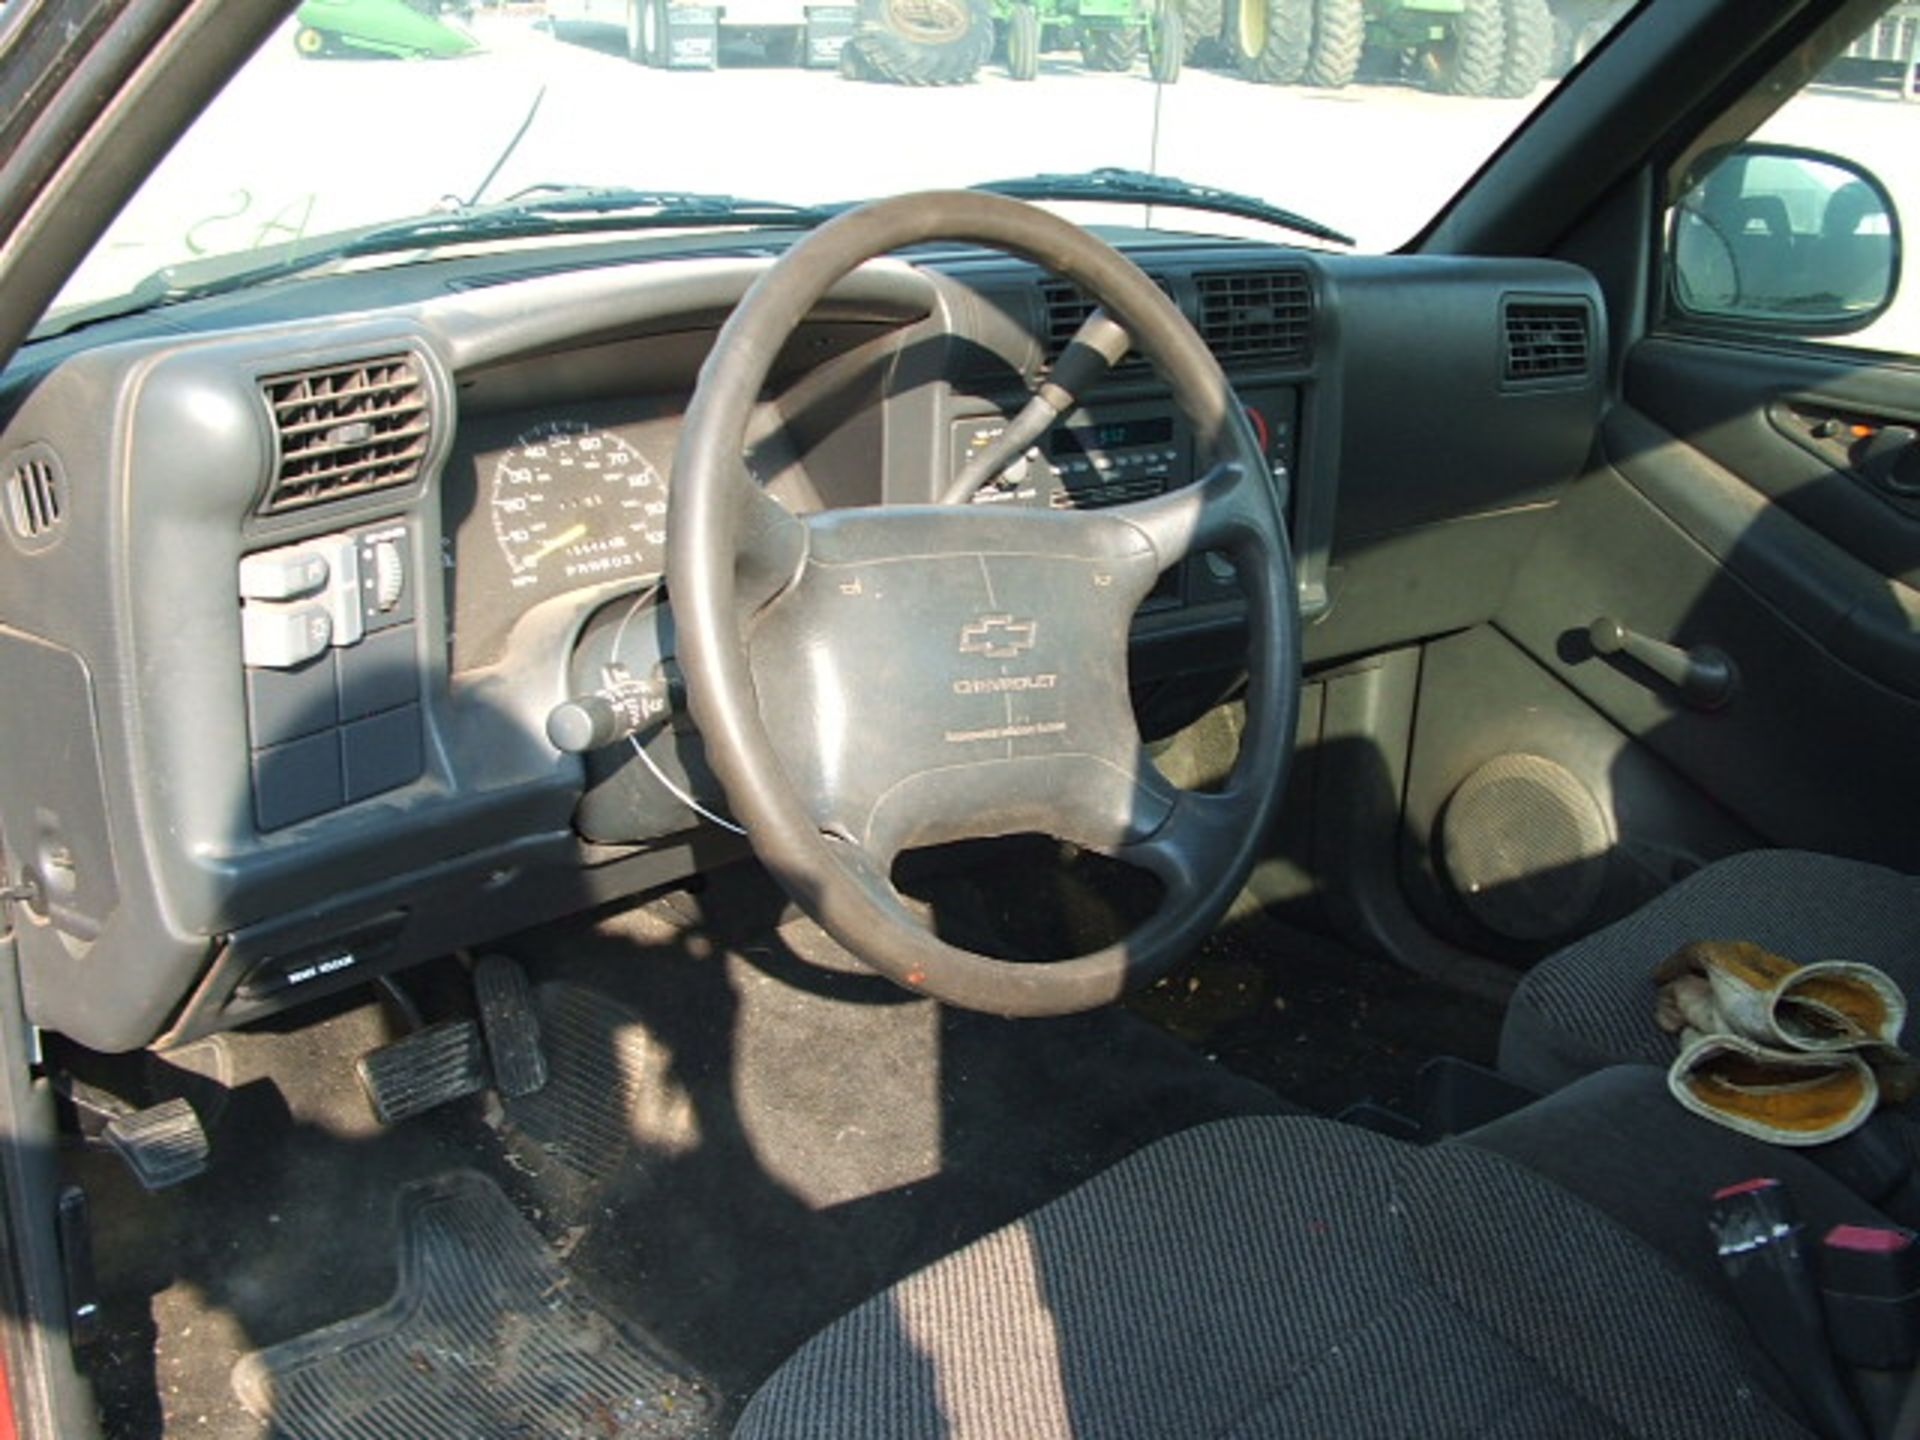 Lot 836 1995 Chevy S10 4Cyl Automatic - As-Is - Image 4 of 5